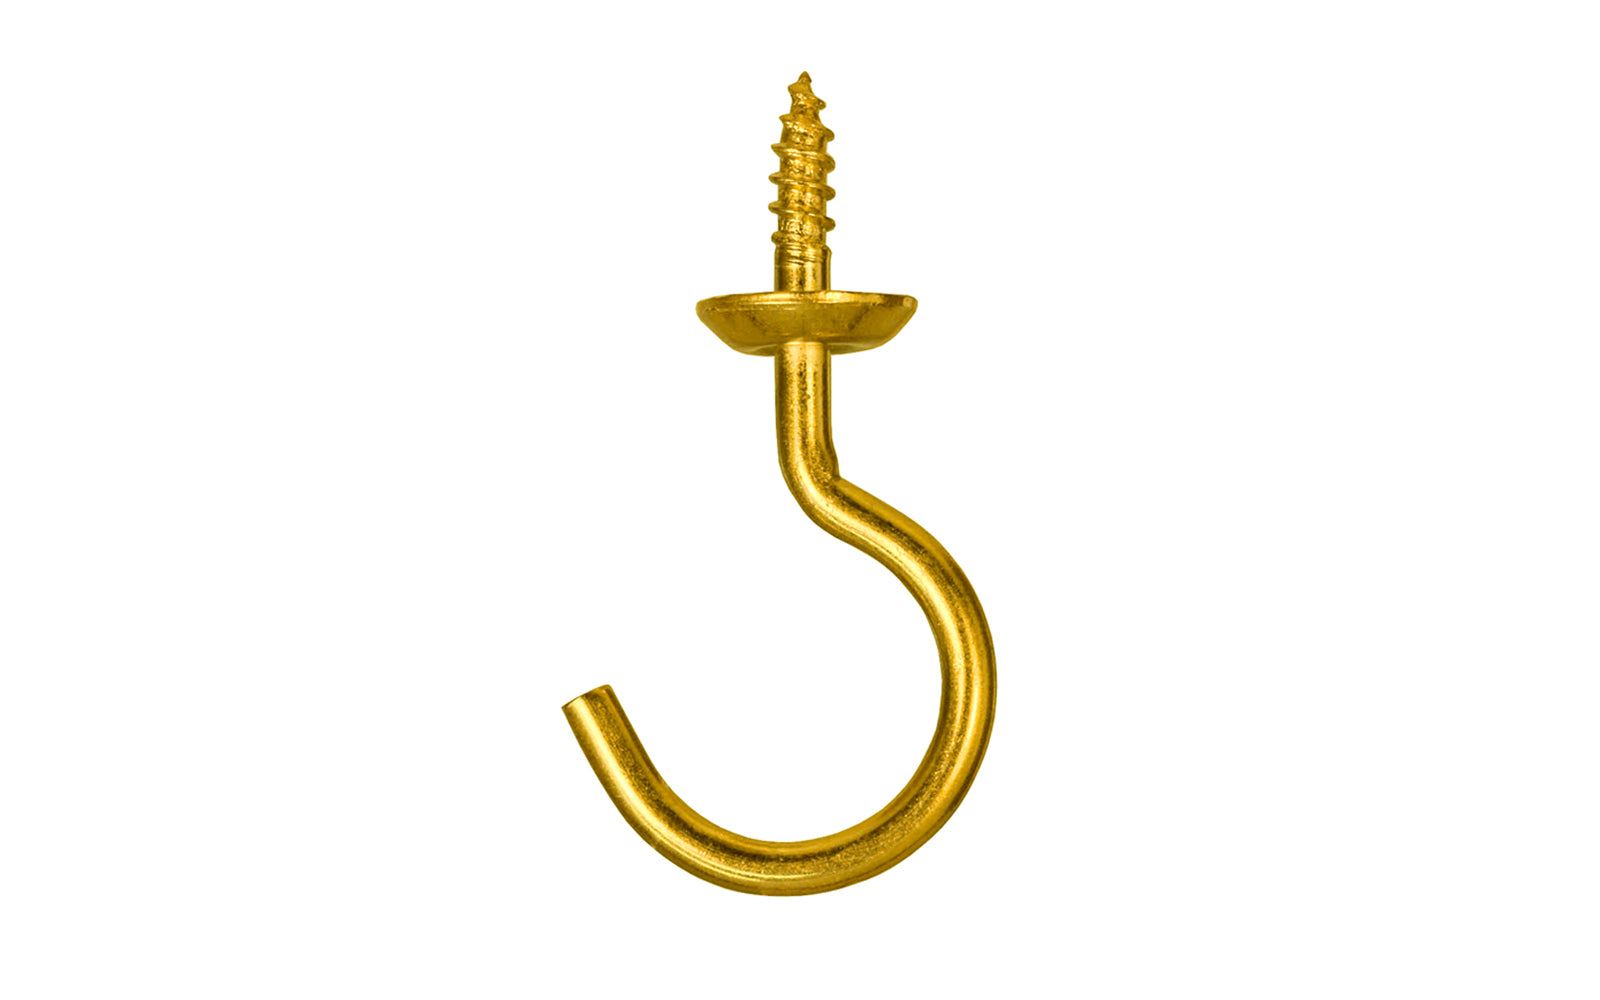 Solid Brass Cup Hooks available at Mutual Screw & Fasteners Supply